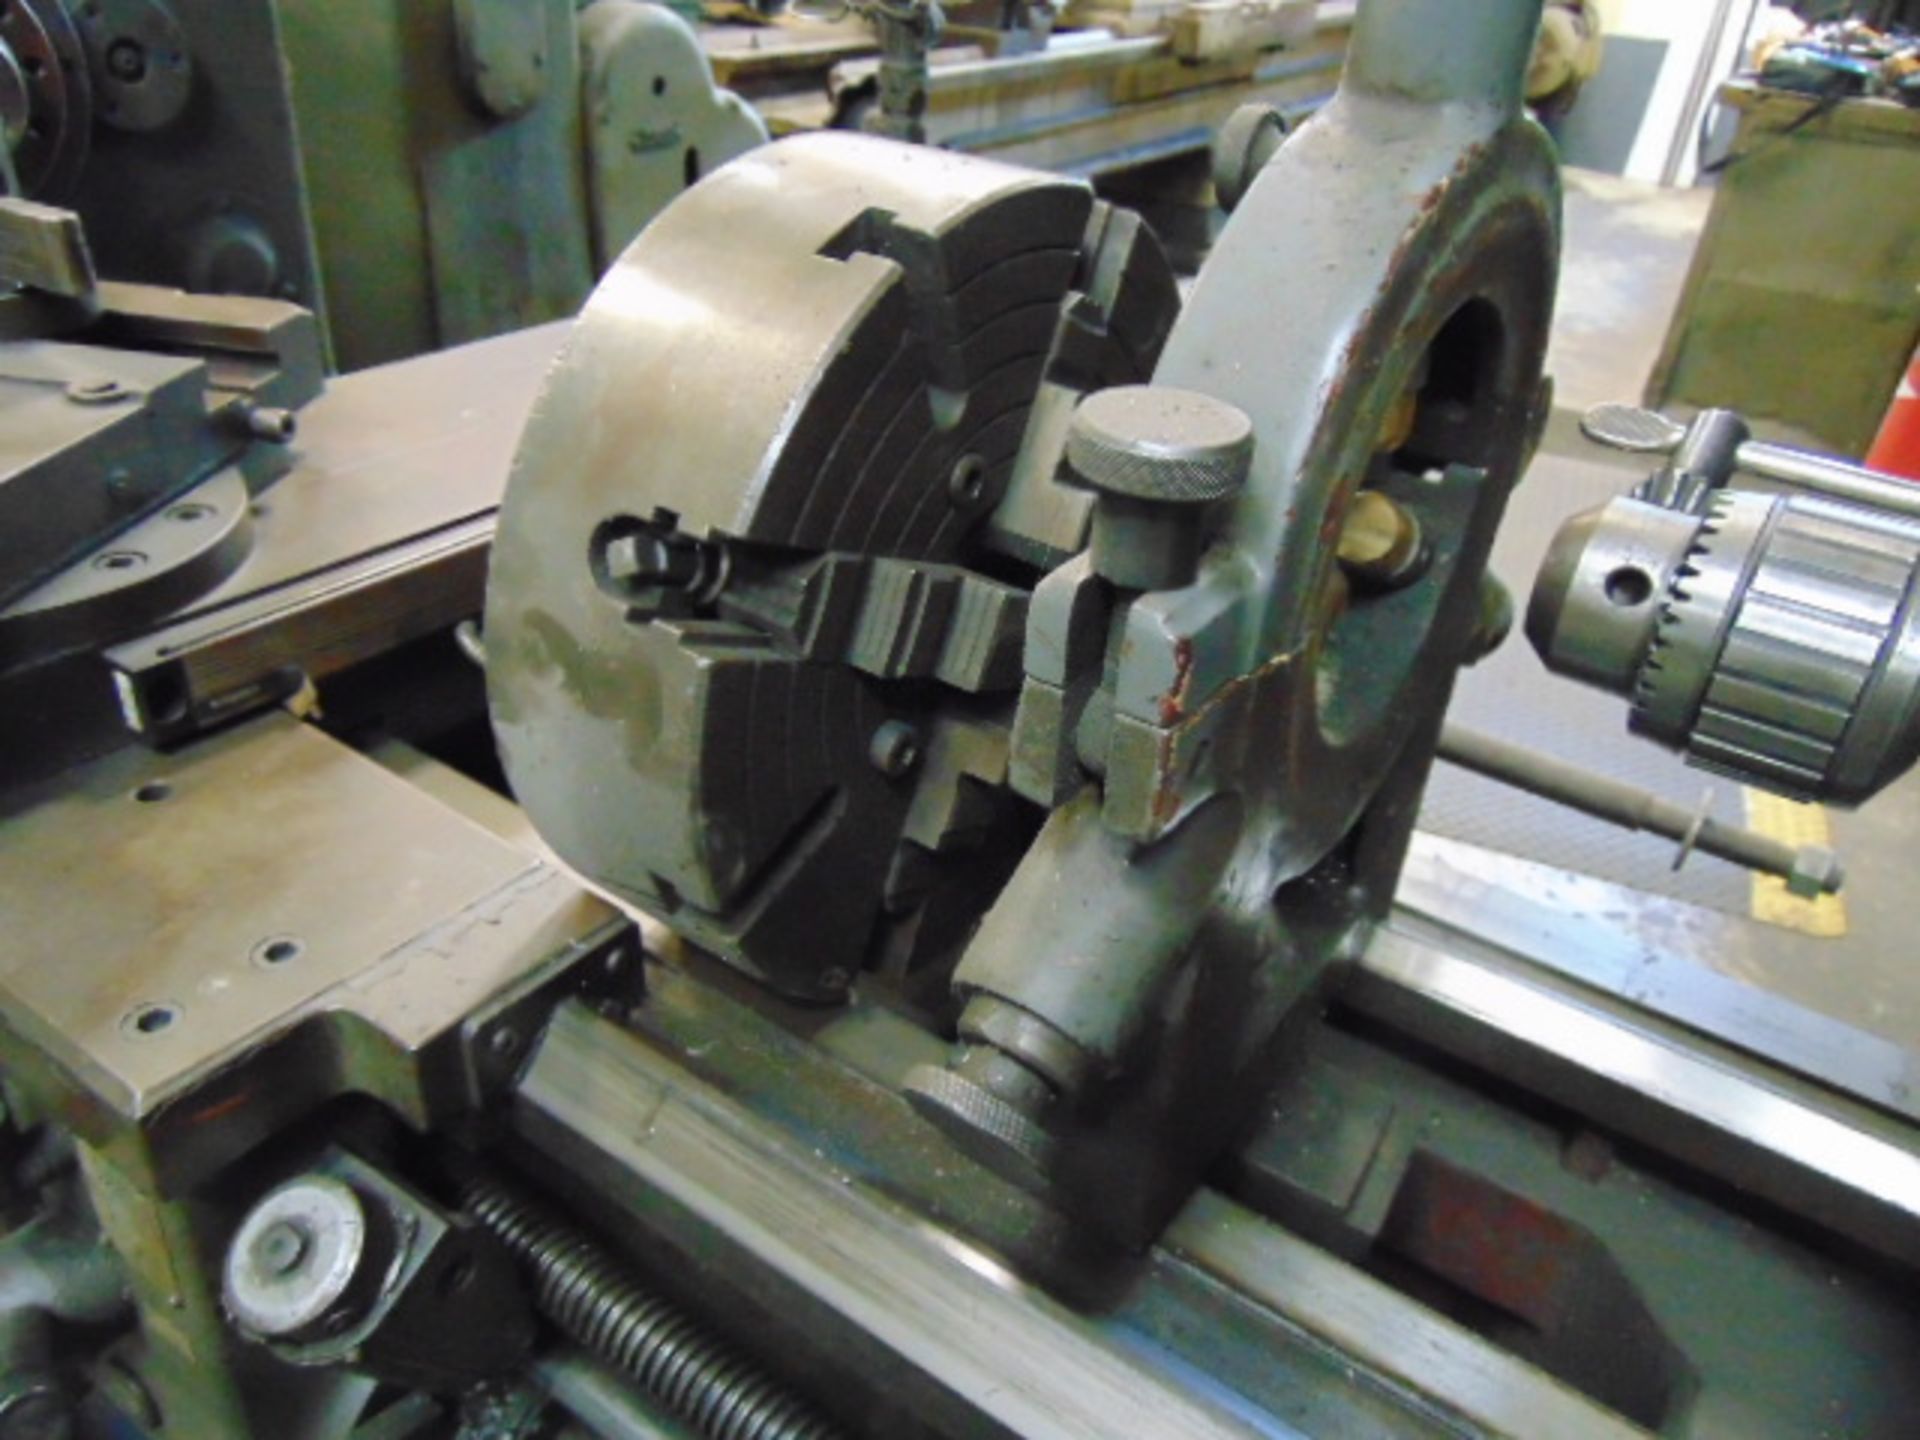 GAP BED ENGINE LATHE, WEBB 17” X 40” MDL. 17GX40, 5 HP motor, taper attach., 5 C lever activated - Image 8 of 15